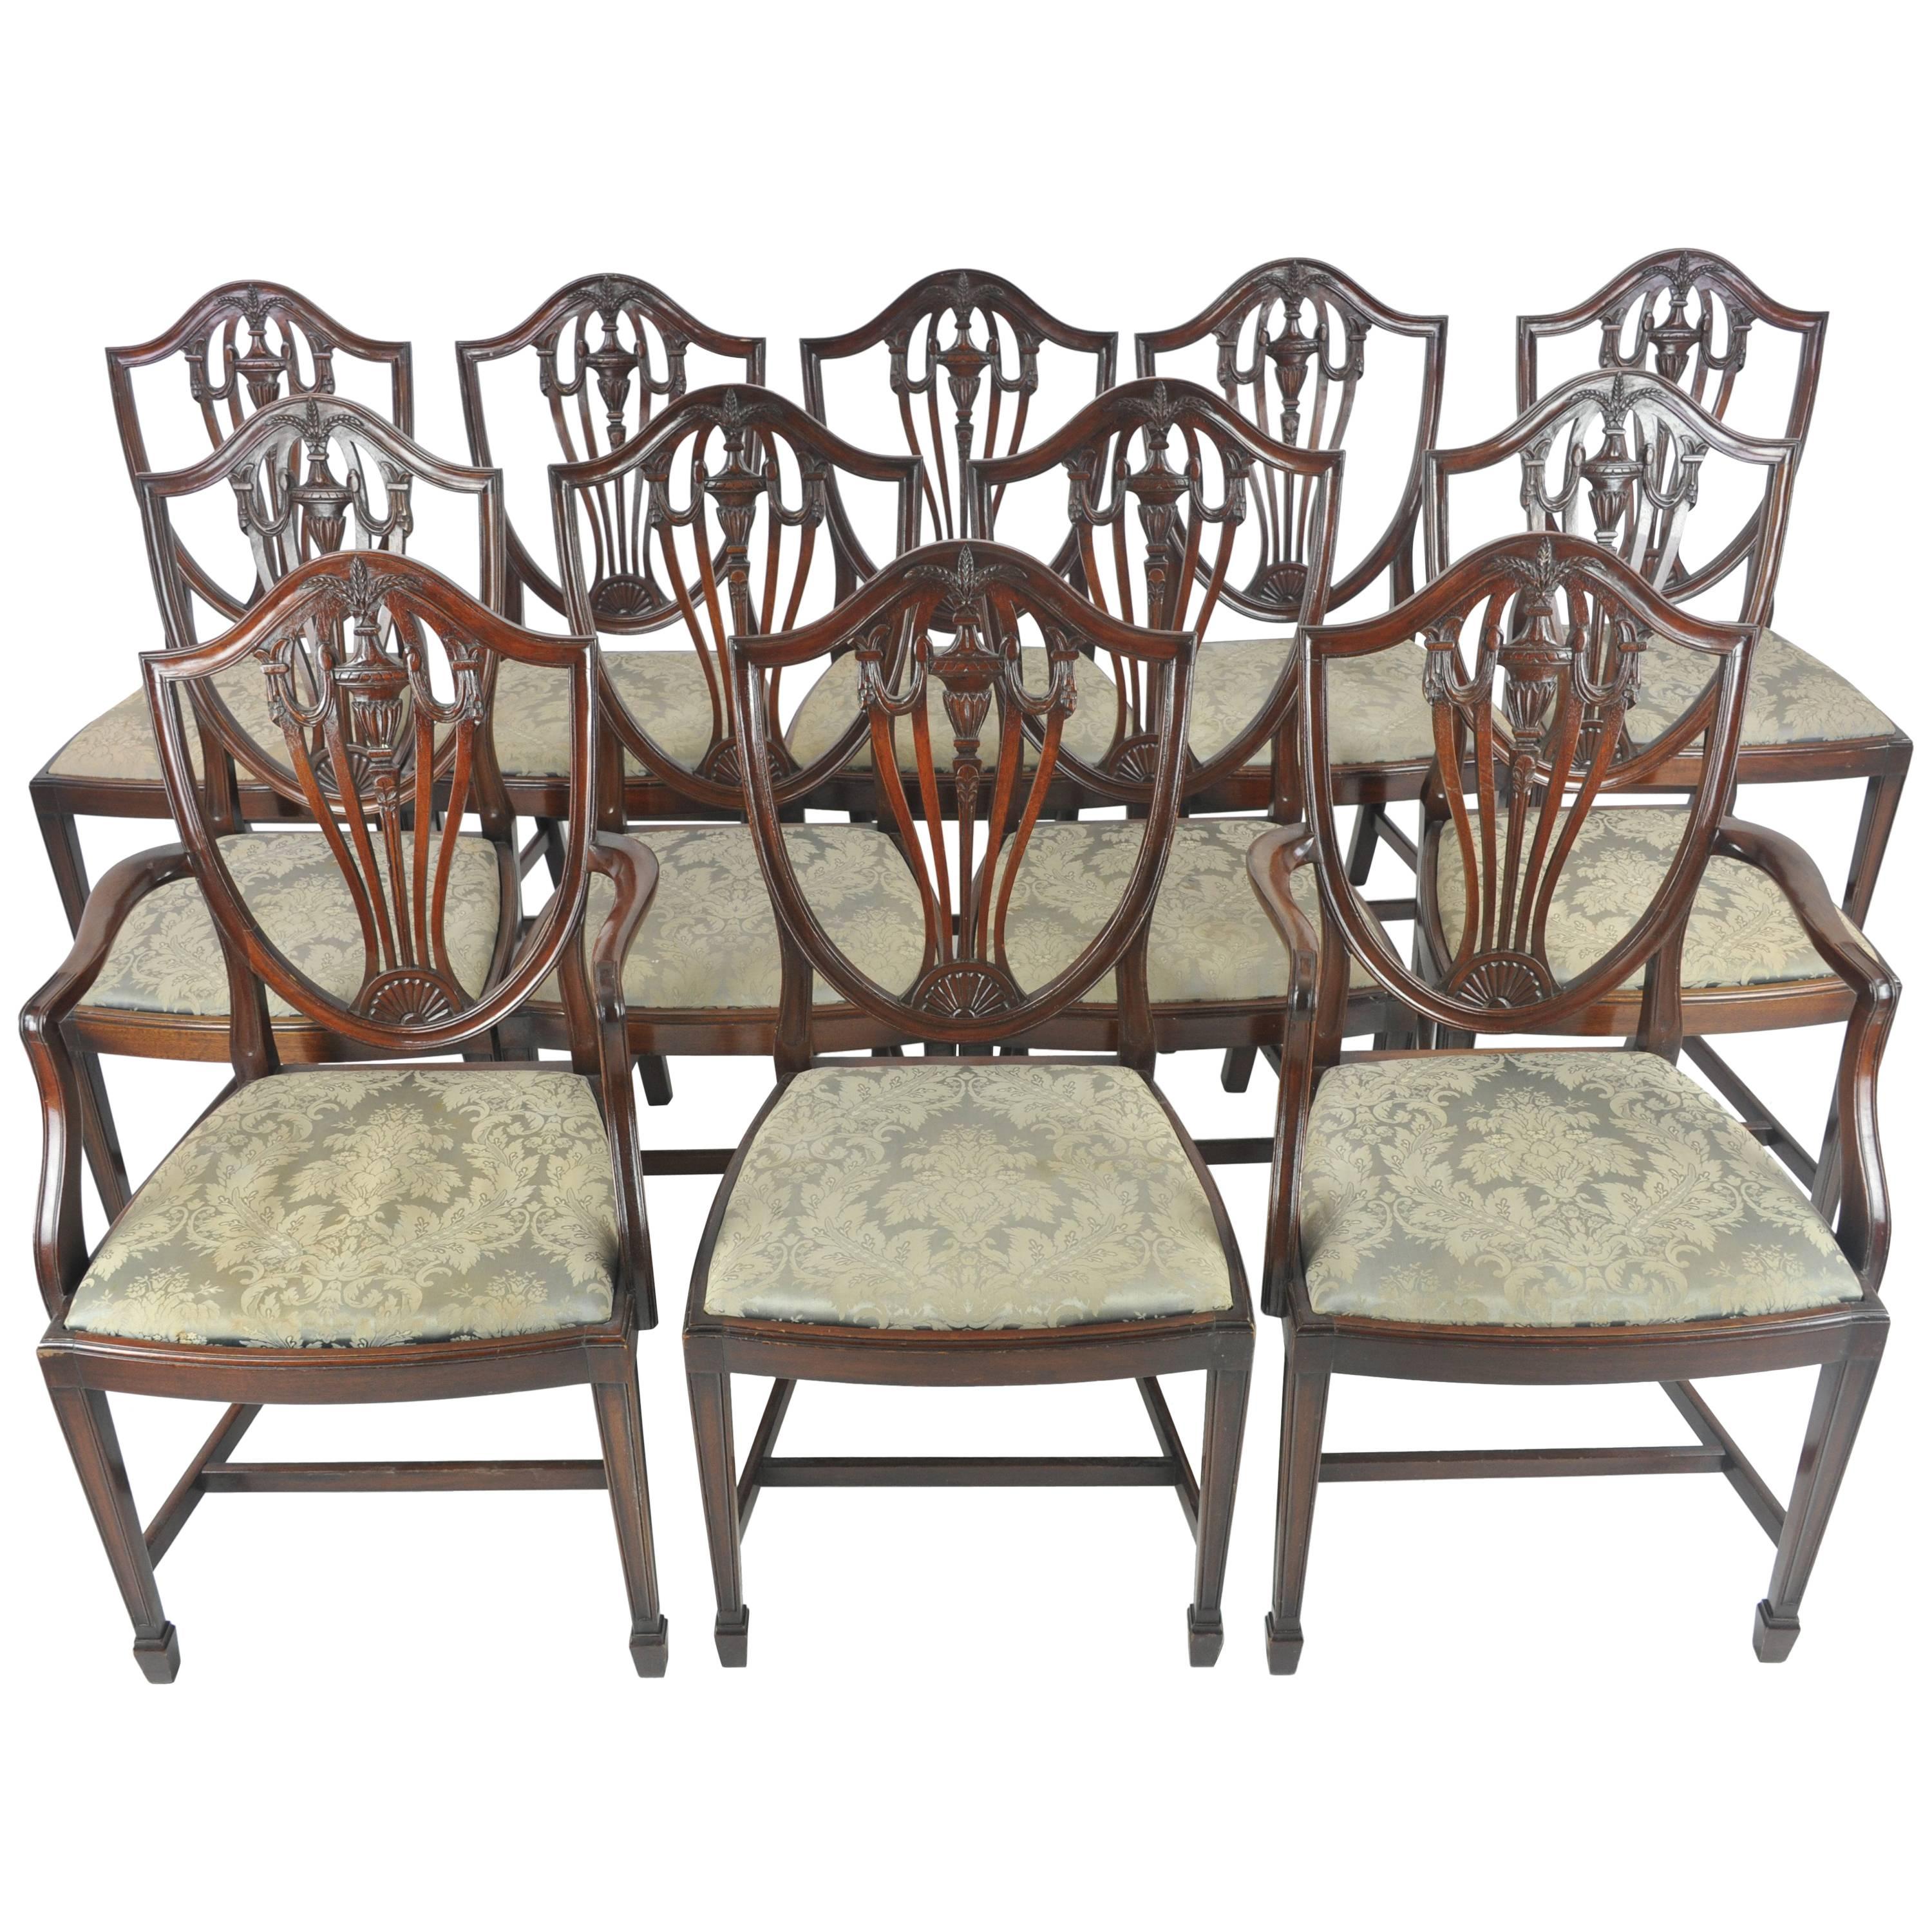 10 Dining Chairs, Antique Dining Chairs, Hepplewhite, Mahogany, B1071 REDUCED!!!